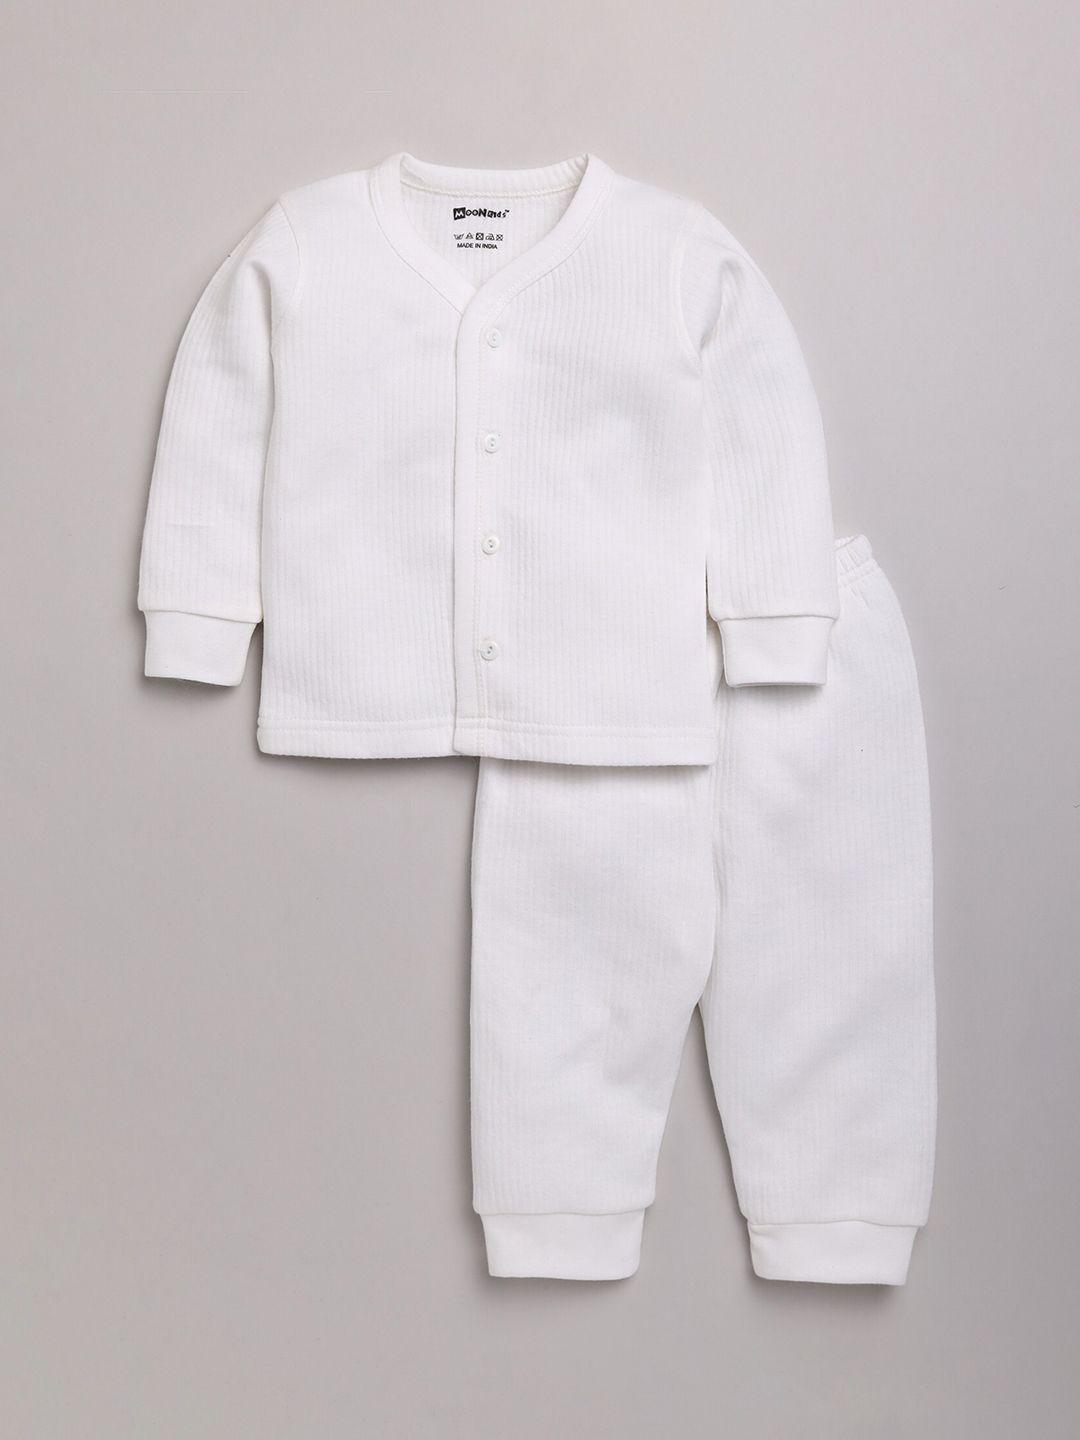 moonkids-infant-boys-off-white-solid-thermal-sets